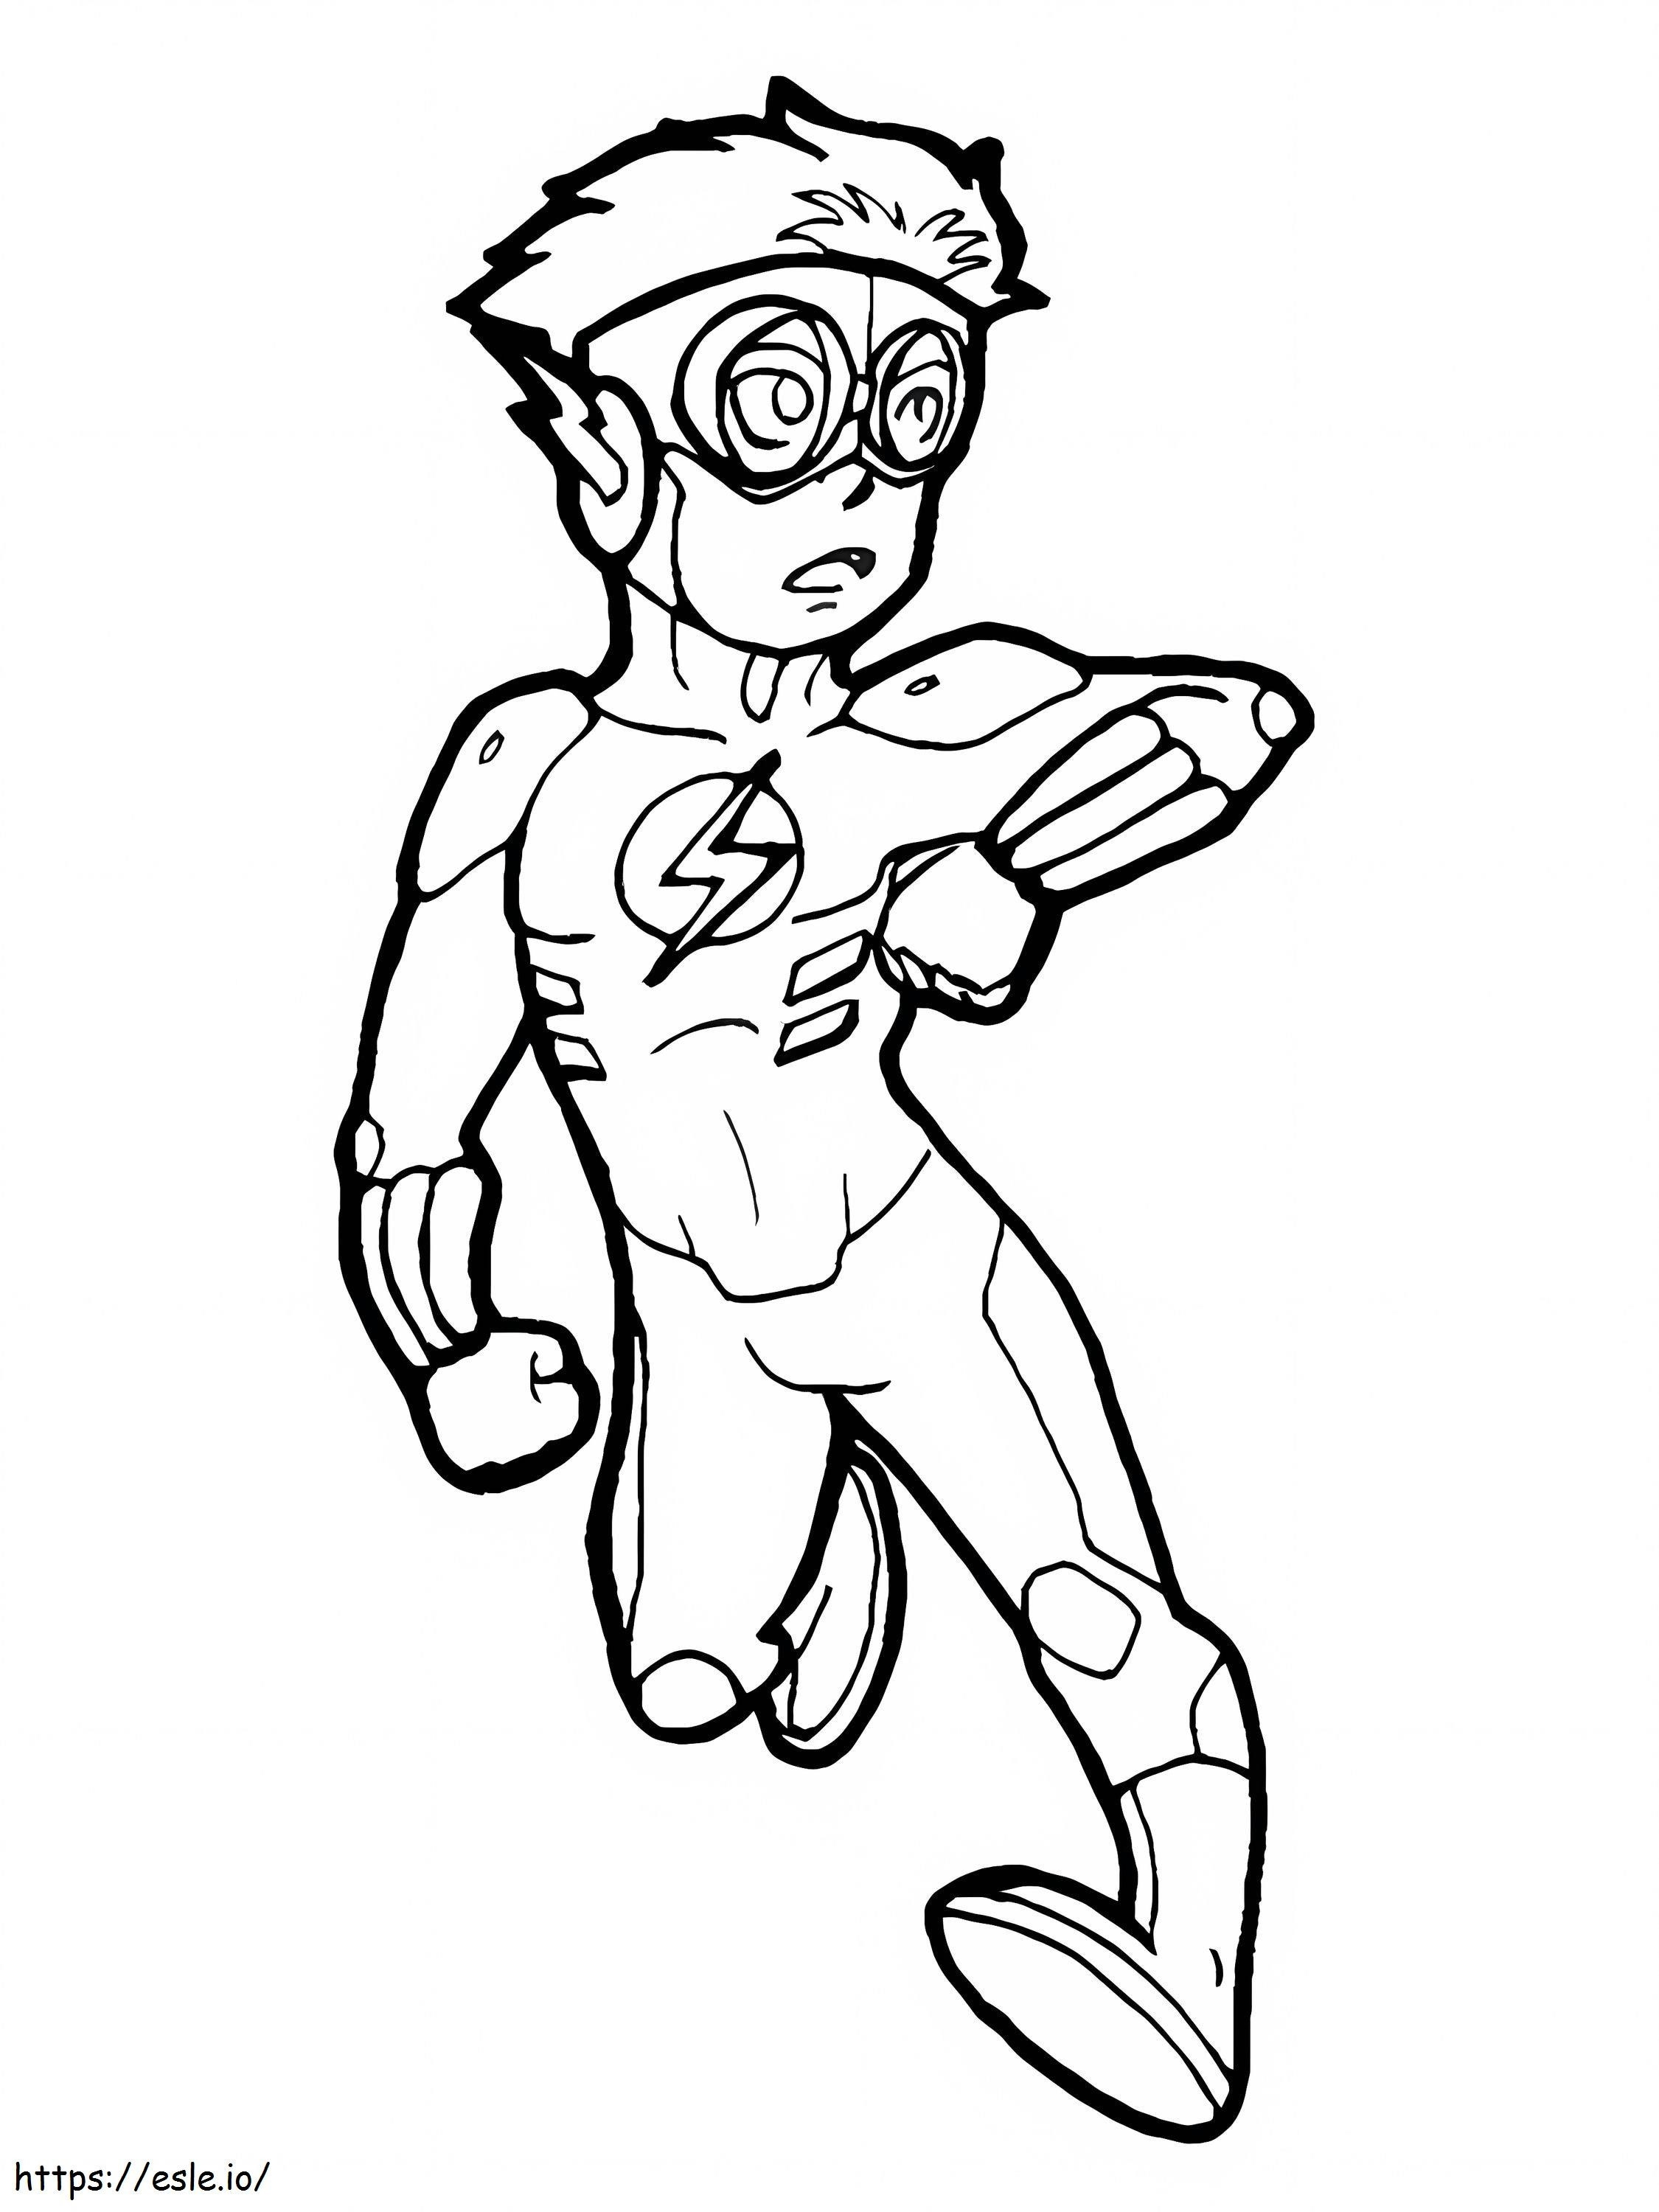 The Flash Wally West coloring page